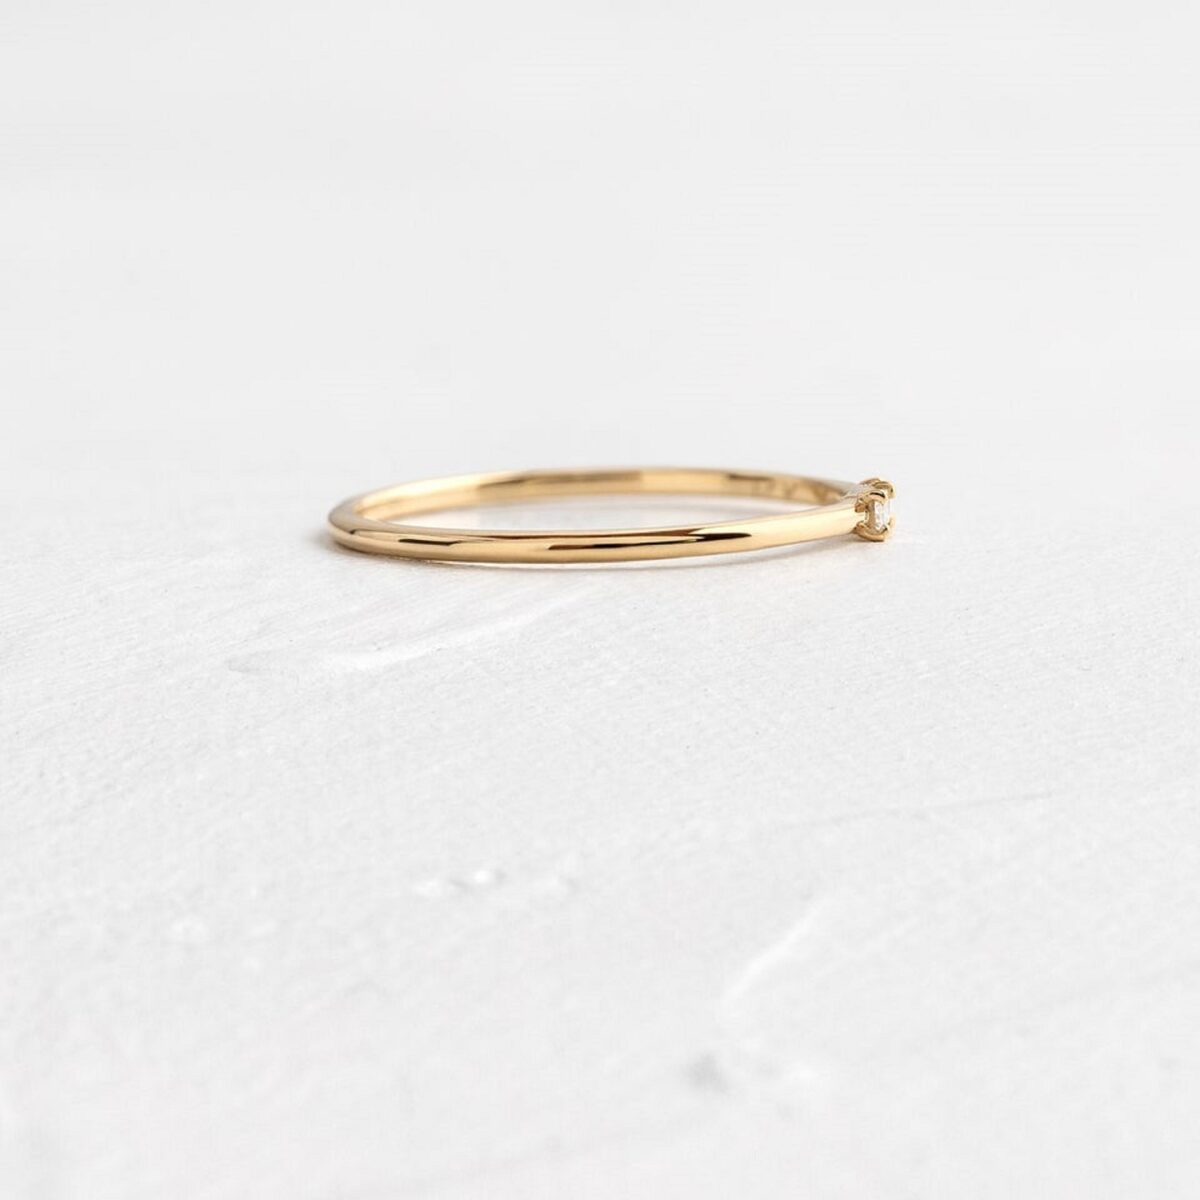 Baguette cut lab grown diamond ring crafted in solid 14k yellow gold.